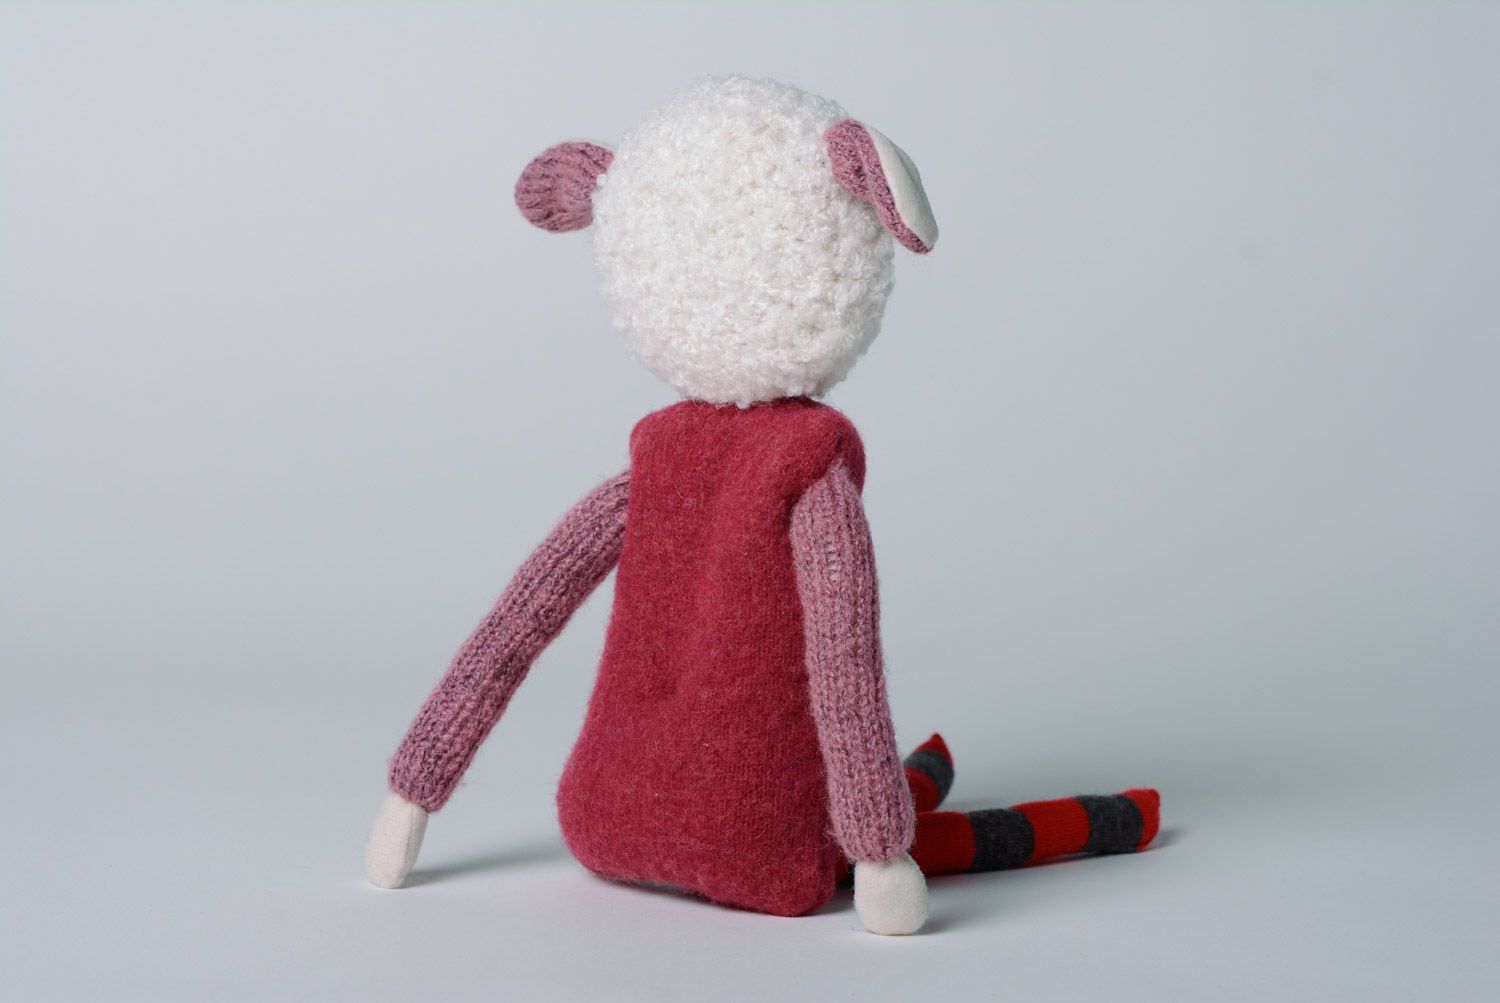 Cute handmade soft toy sewn of jersey and wool in the shape of lamb in coat photo 4